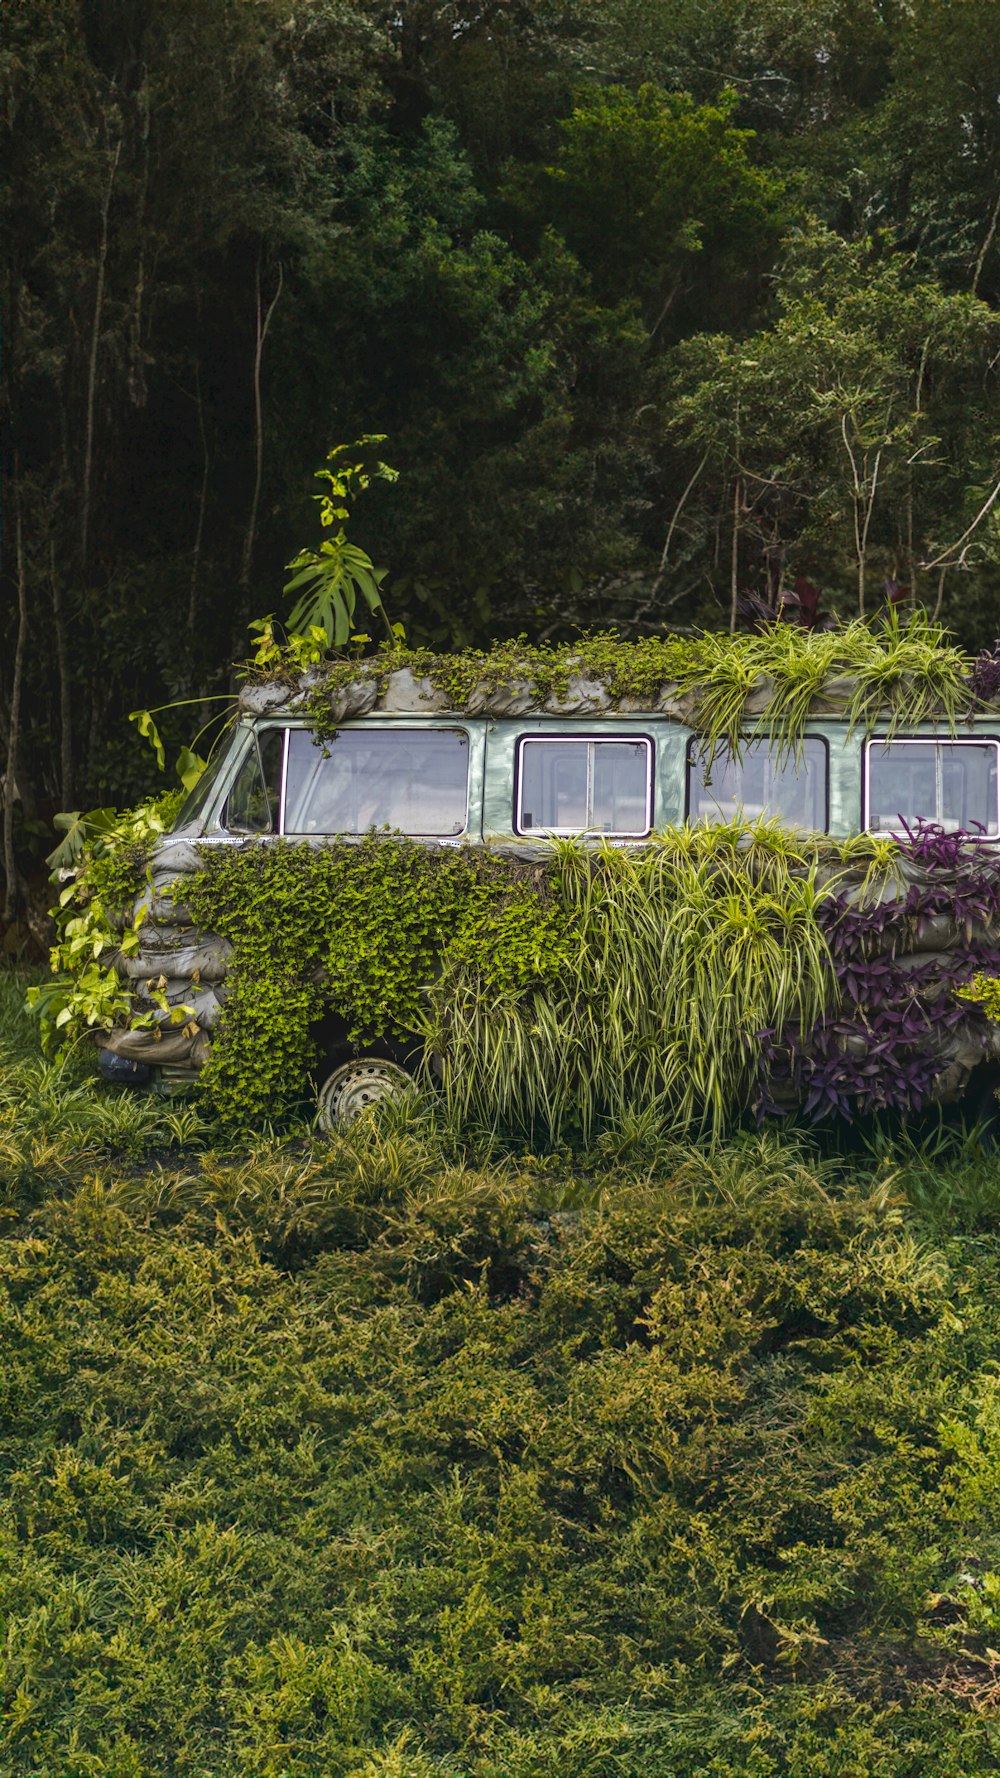 an old bus covered in plants in a field